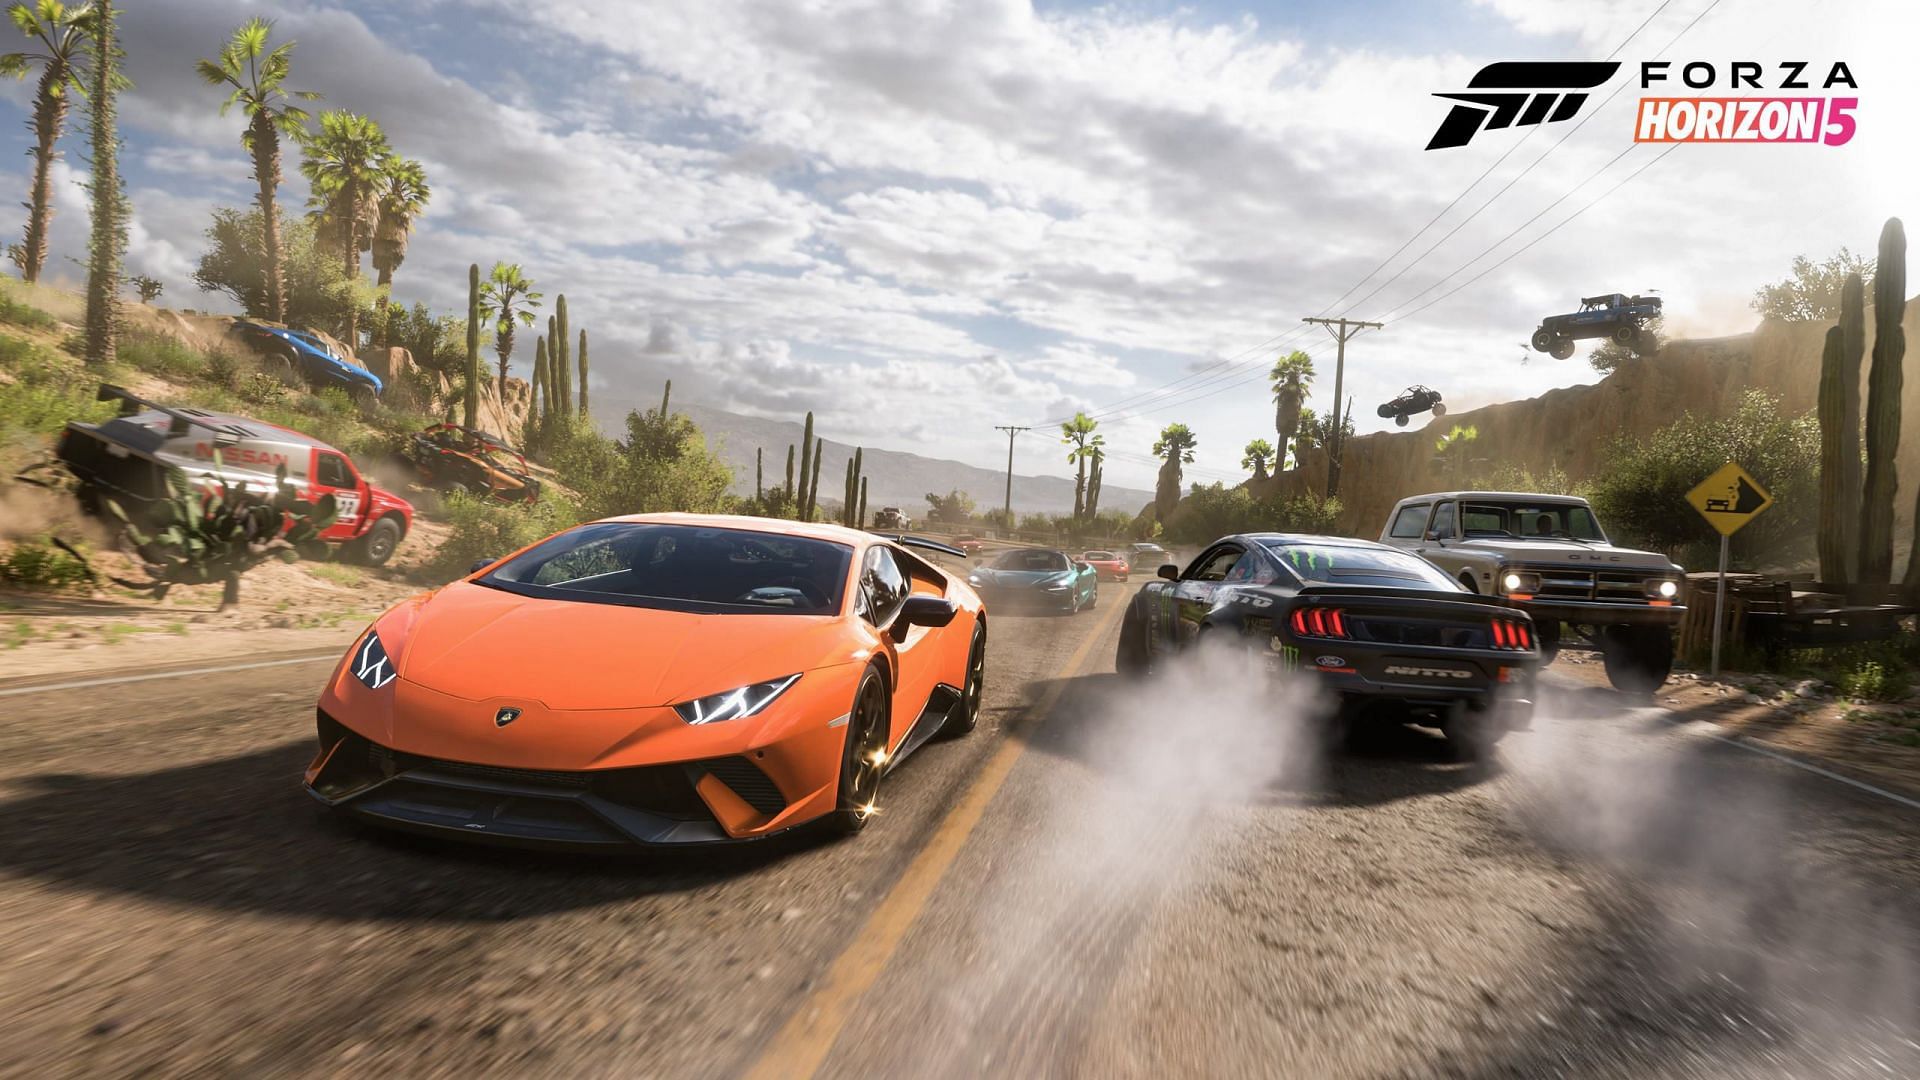 Forza Horizon beat out four other competitors to win the Best Sports/Racing Game gong at The Game Awards 2021 (Image via Forza Horizon 5)